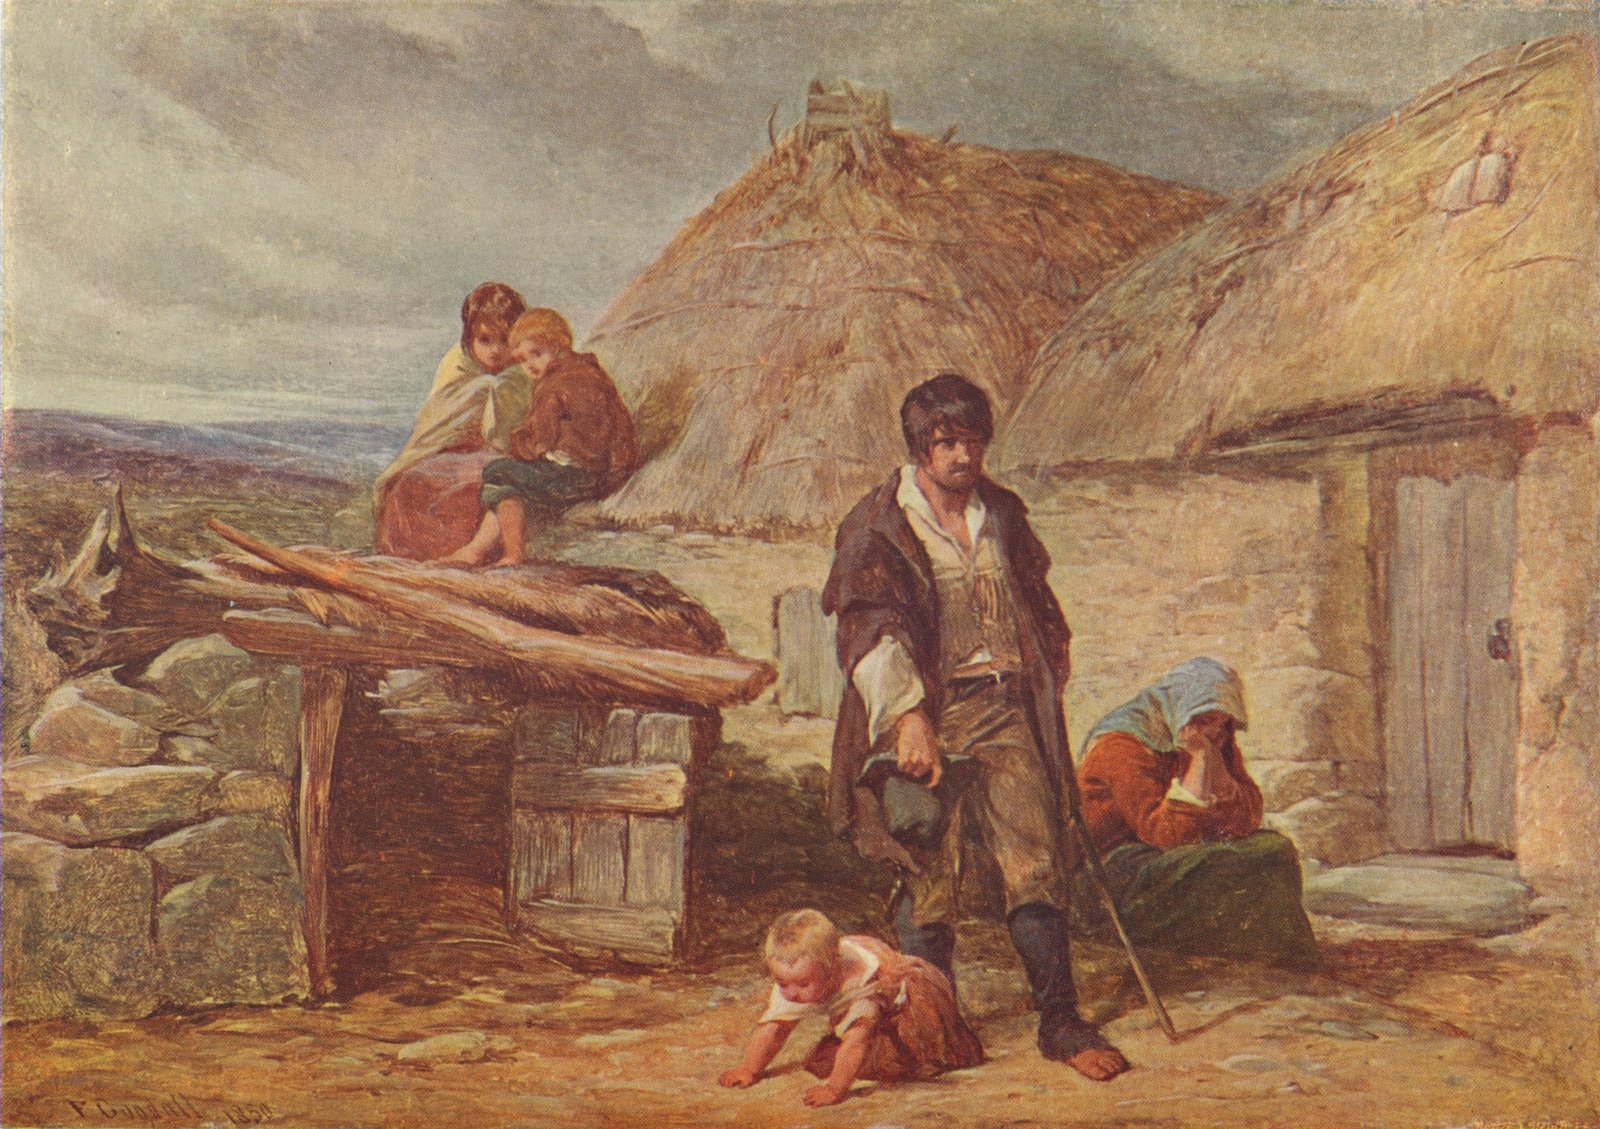 Image - An Irish Eviction', 1850 (1906). From Cassell's Illustrated History of England, Vol. V. (Cassell and Company, Limited, London, Paris, New York & Melbourne, 1906). Artist Frederick Goodall. Source: The Print Collector/Getty Images